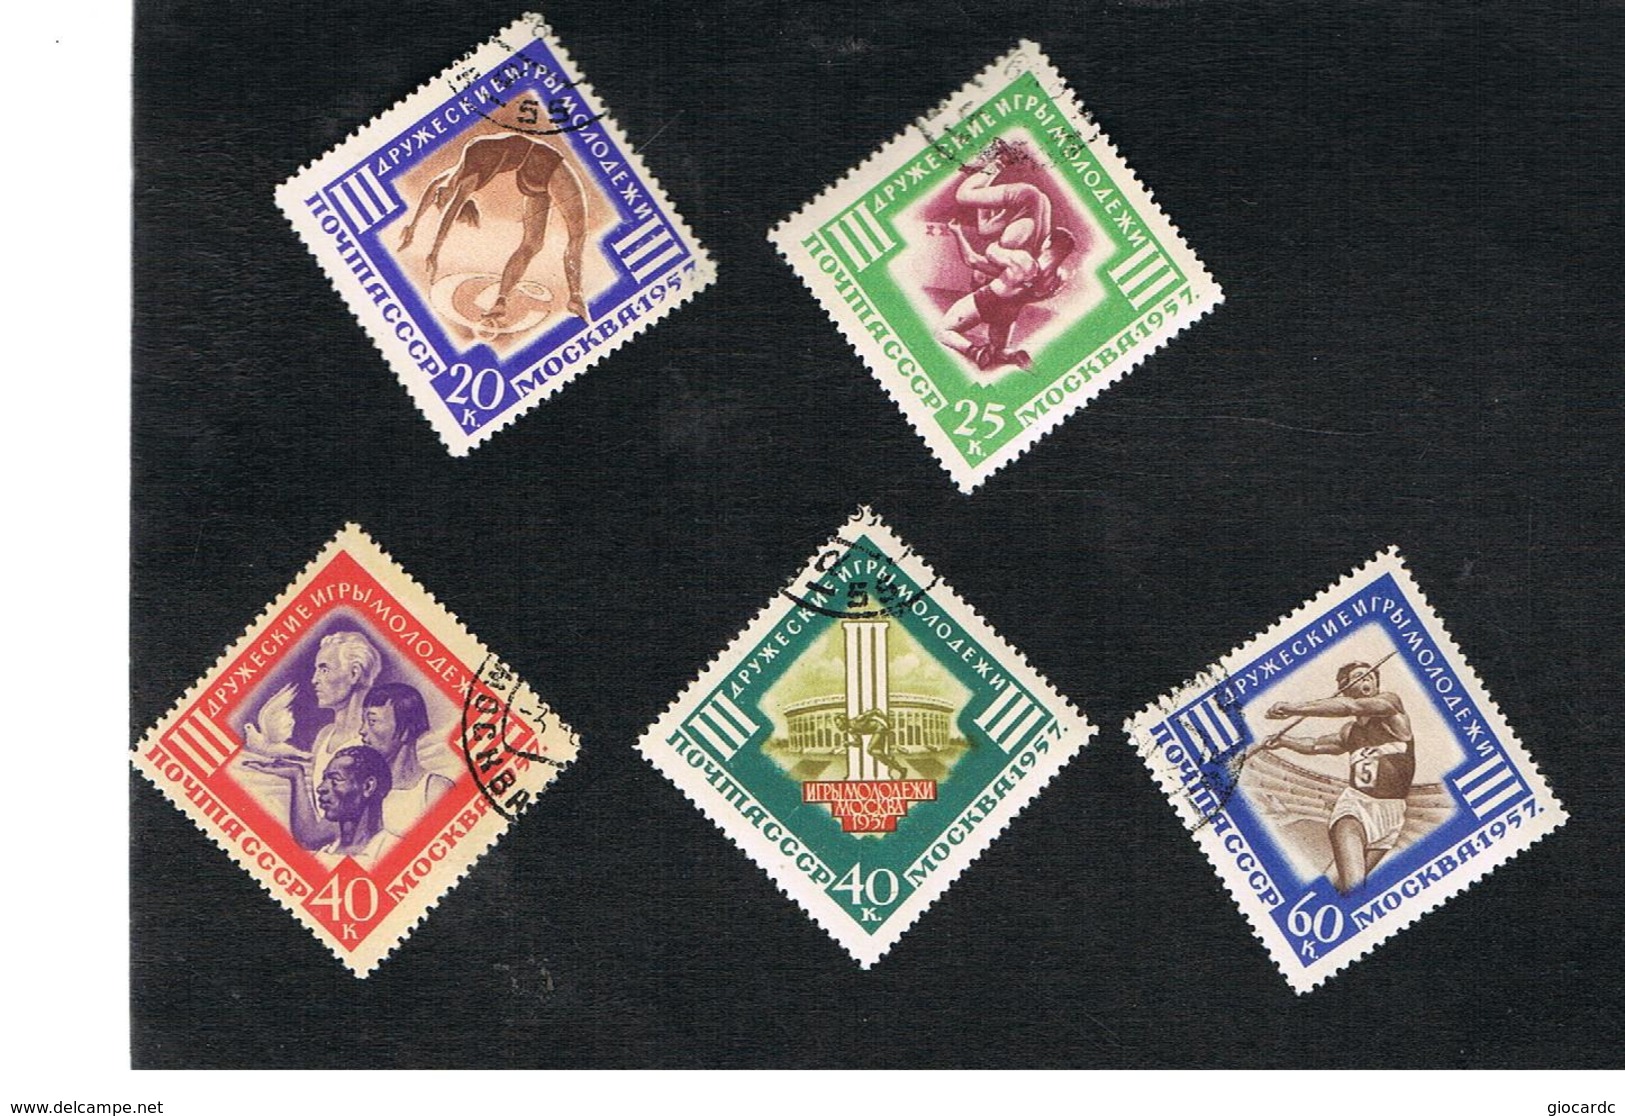 URSS - YV 2096.2100  - 1957 INT. YOUTH GAMES (COMPLET SET OF 5)   - USED° - Gebruikt